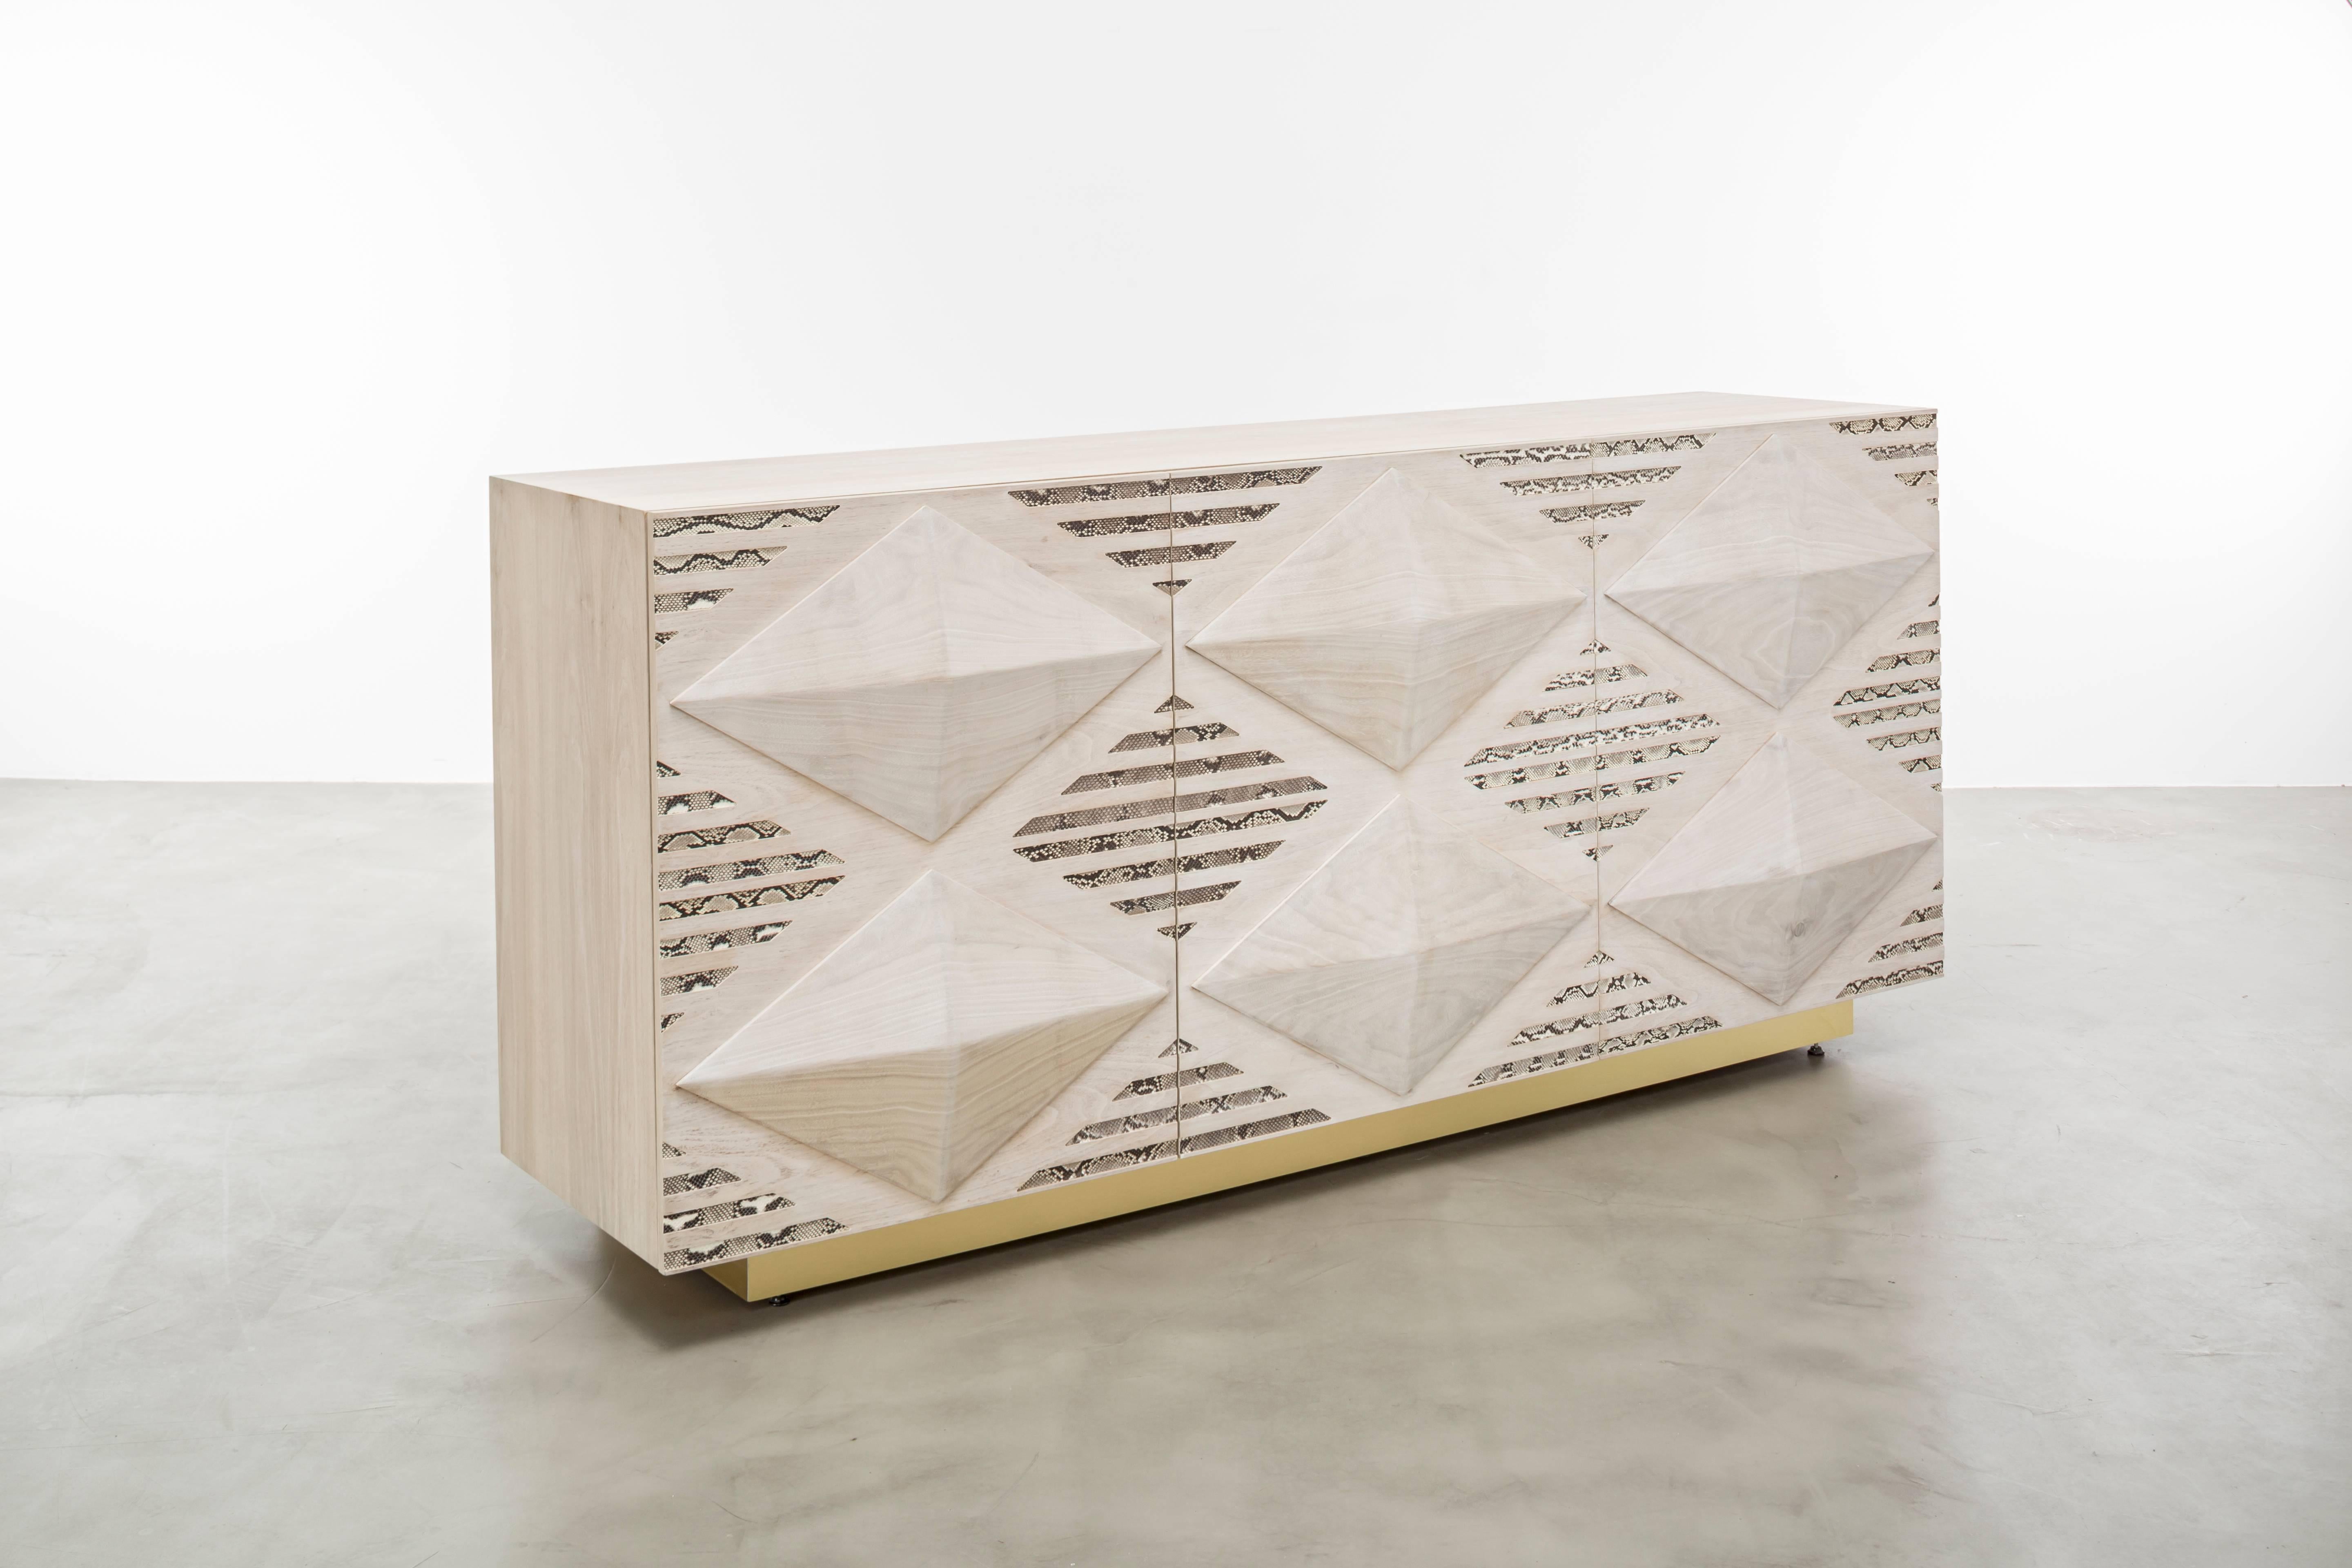 INES SNAKE BUFFET CABINET - Modern Bleached Walnut Cabinet + Authentic Snakeskin

The Ines Snake Buffet Cabinet is a high-end, luxury piece of furniture designed to add a touch of sophistication and elegance to any interior space. The cabinet is